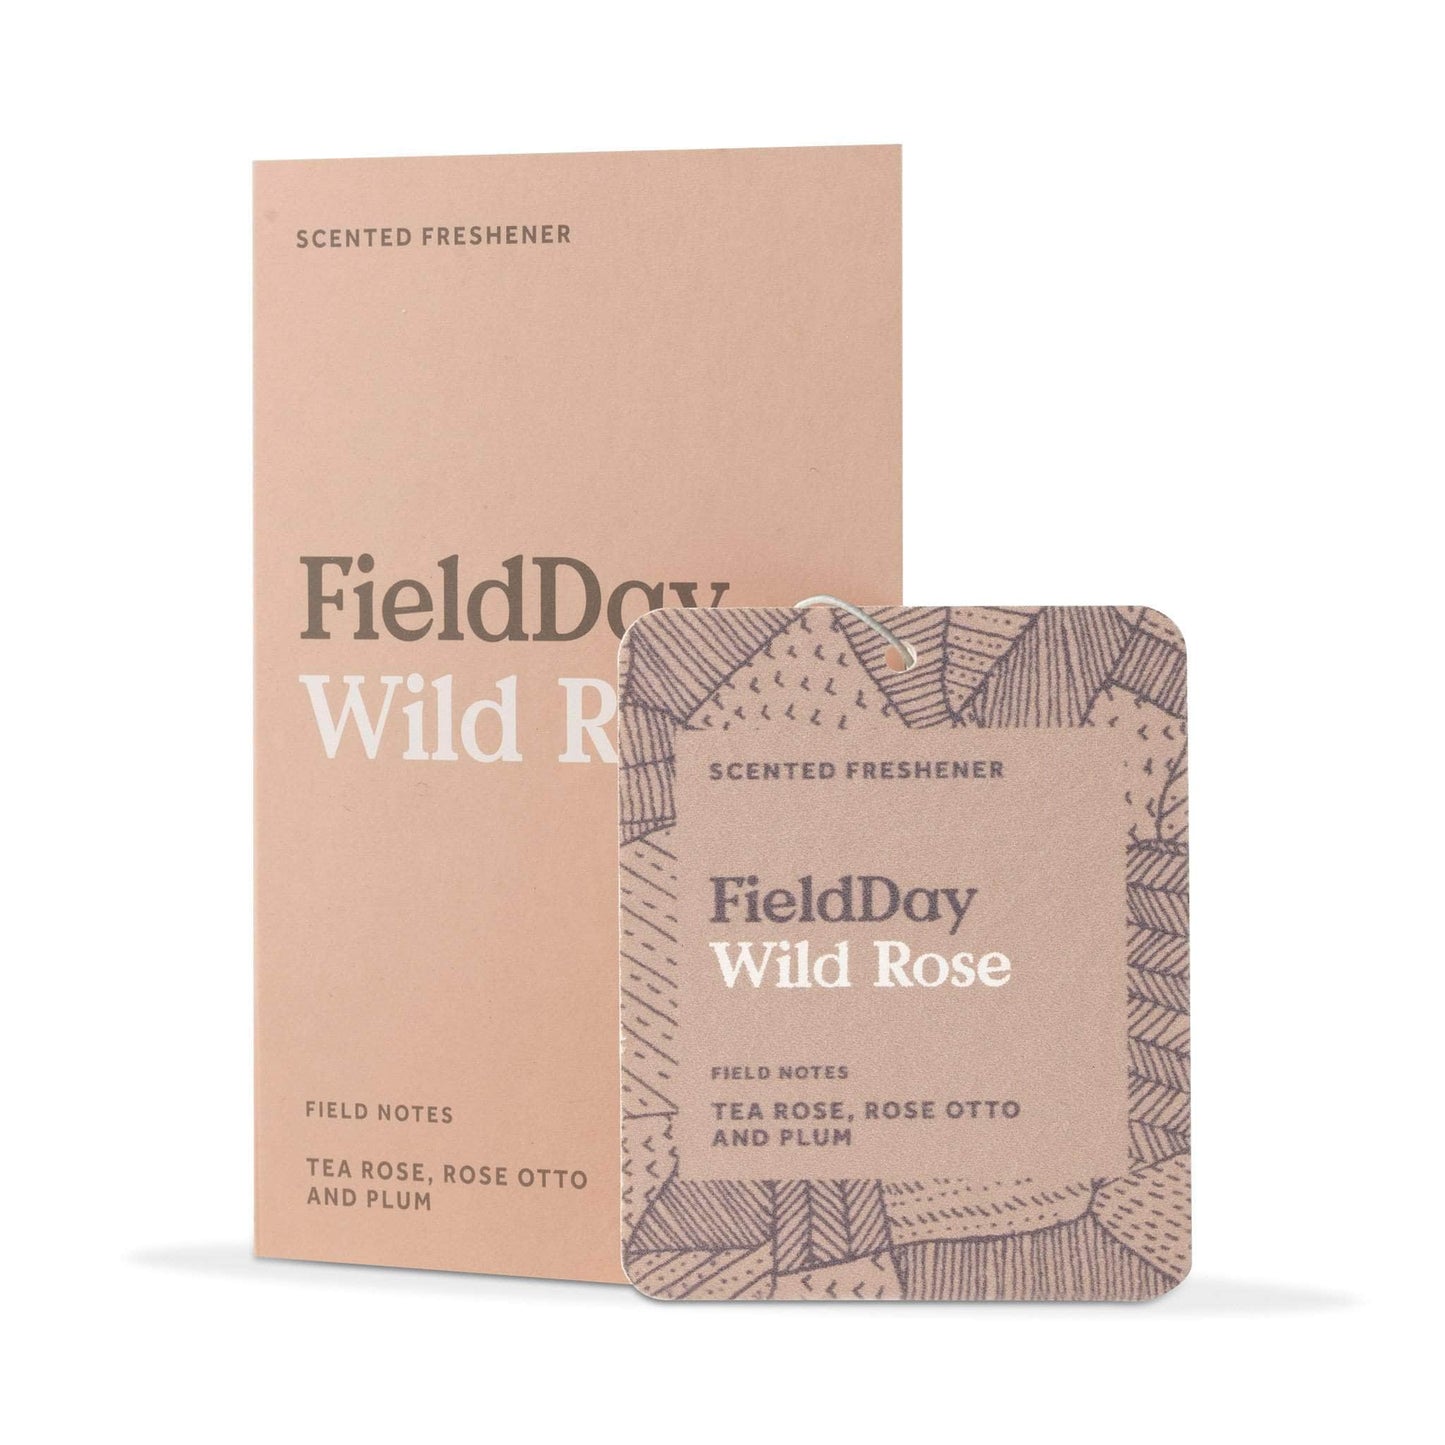 FieldDay Home Fragrance FieldDay Classic Collection Scented Freshener - Wild Rose